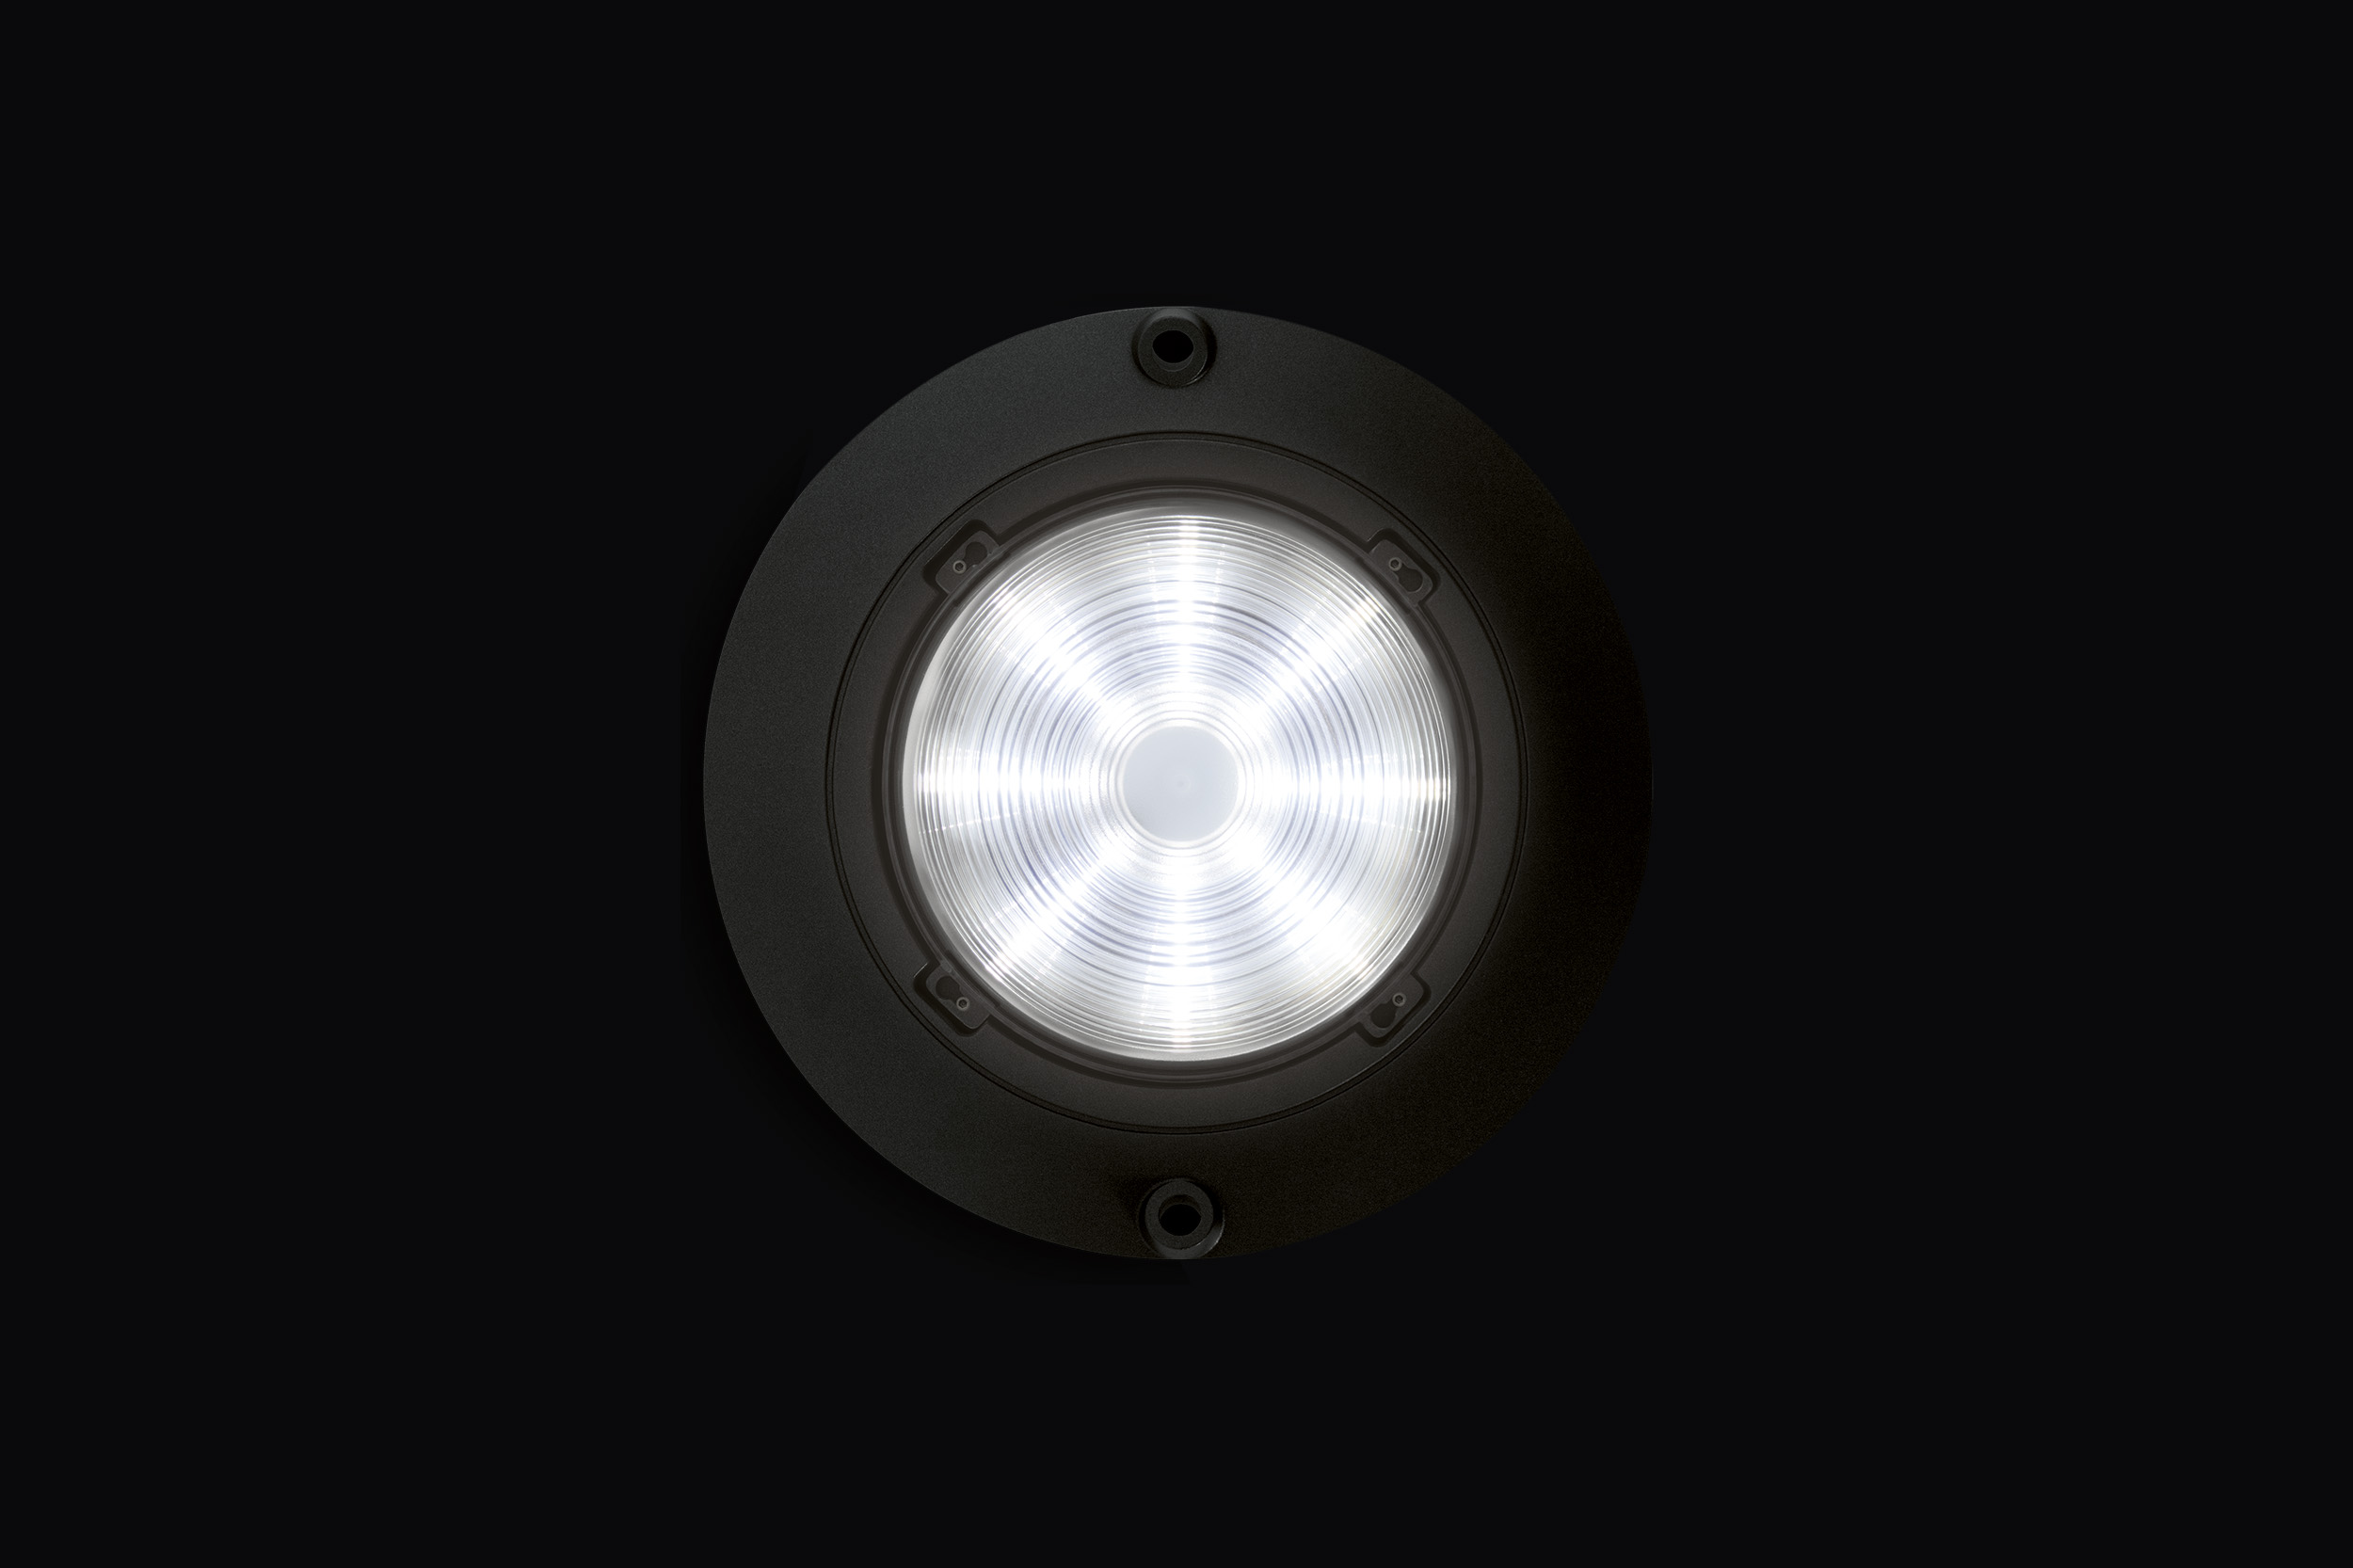 An image of Trigo luminaire showing the light module on a black background.